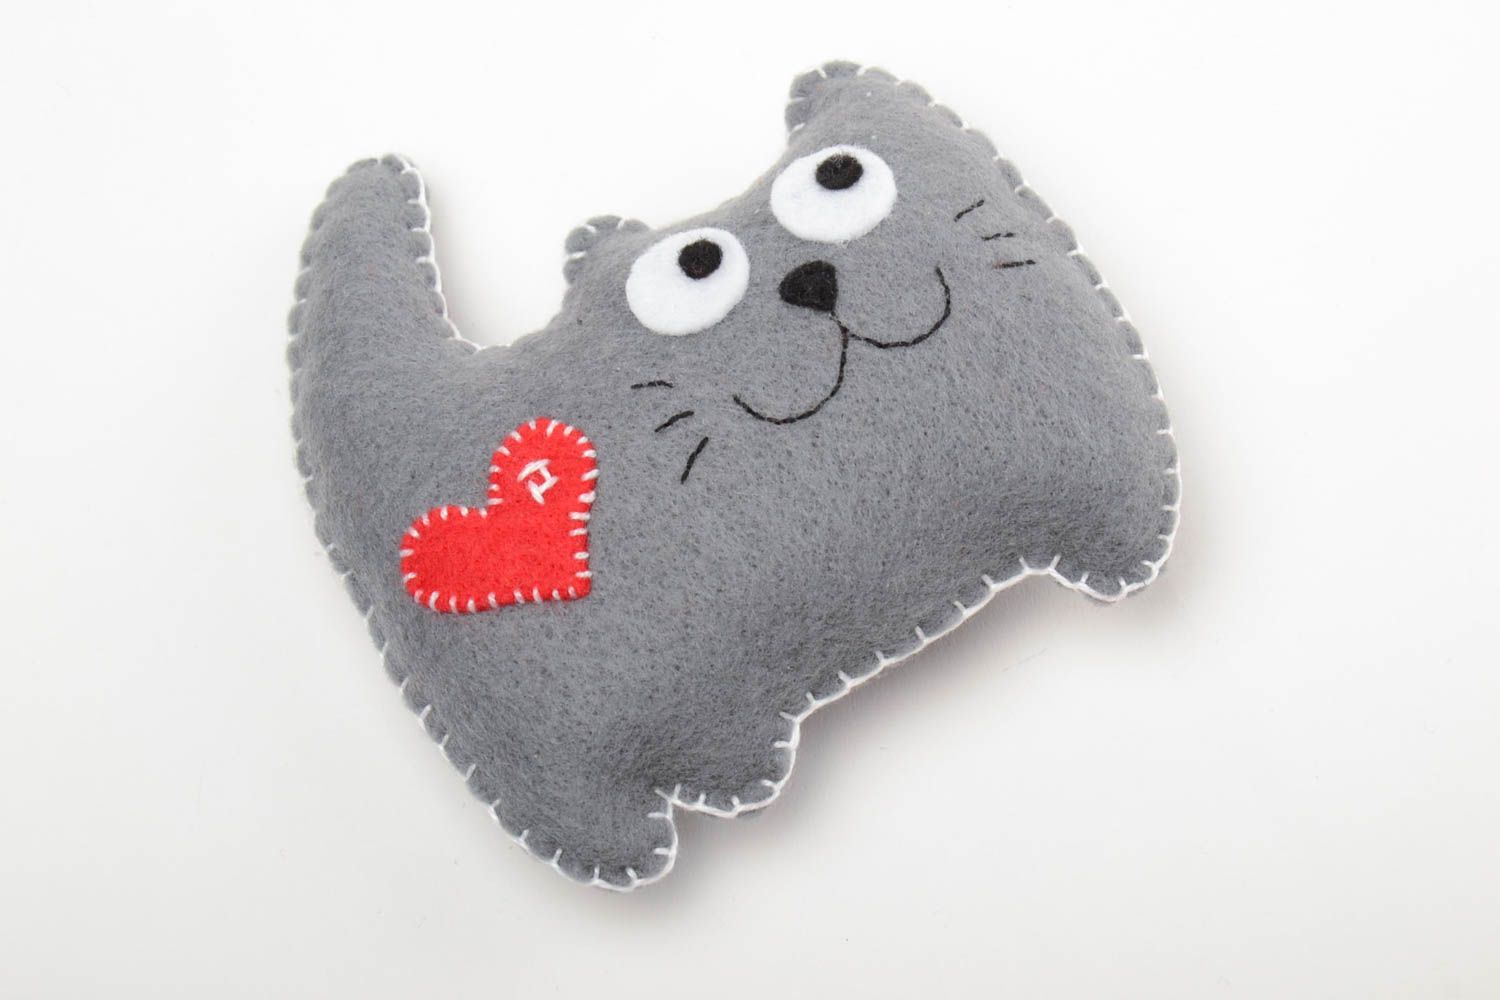 Handmade cute small felt soft toy gray cat with red heart for little kids photo 2